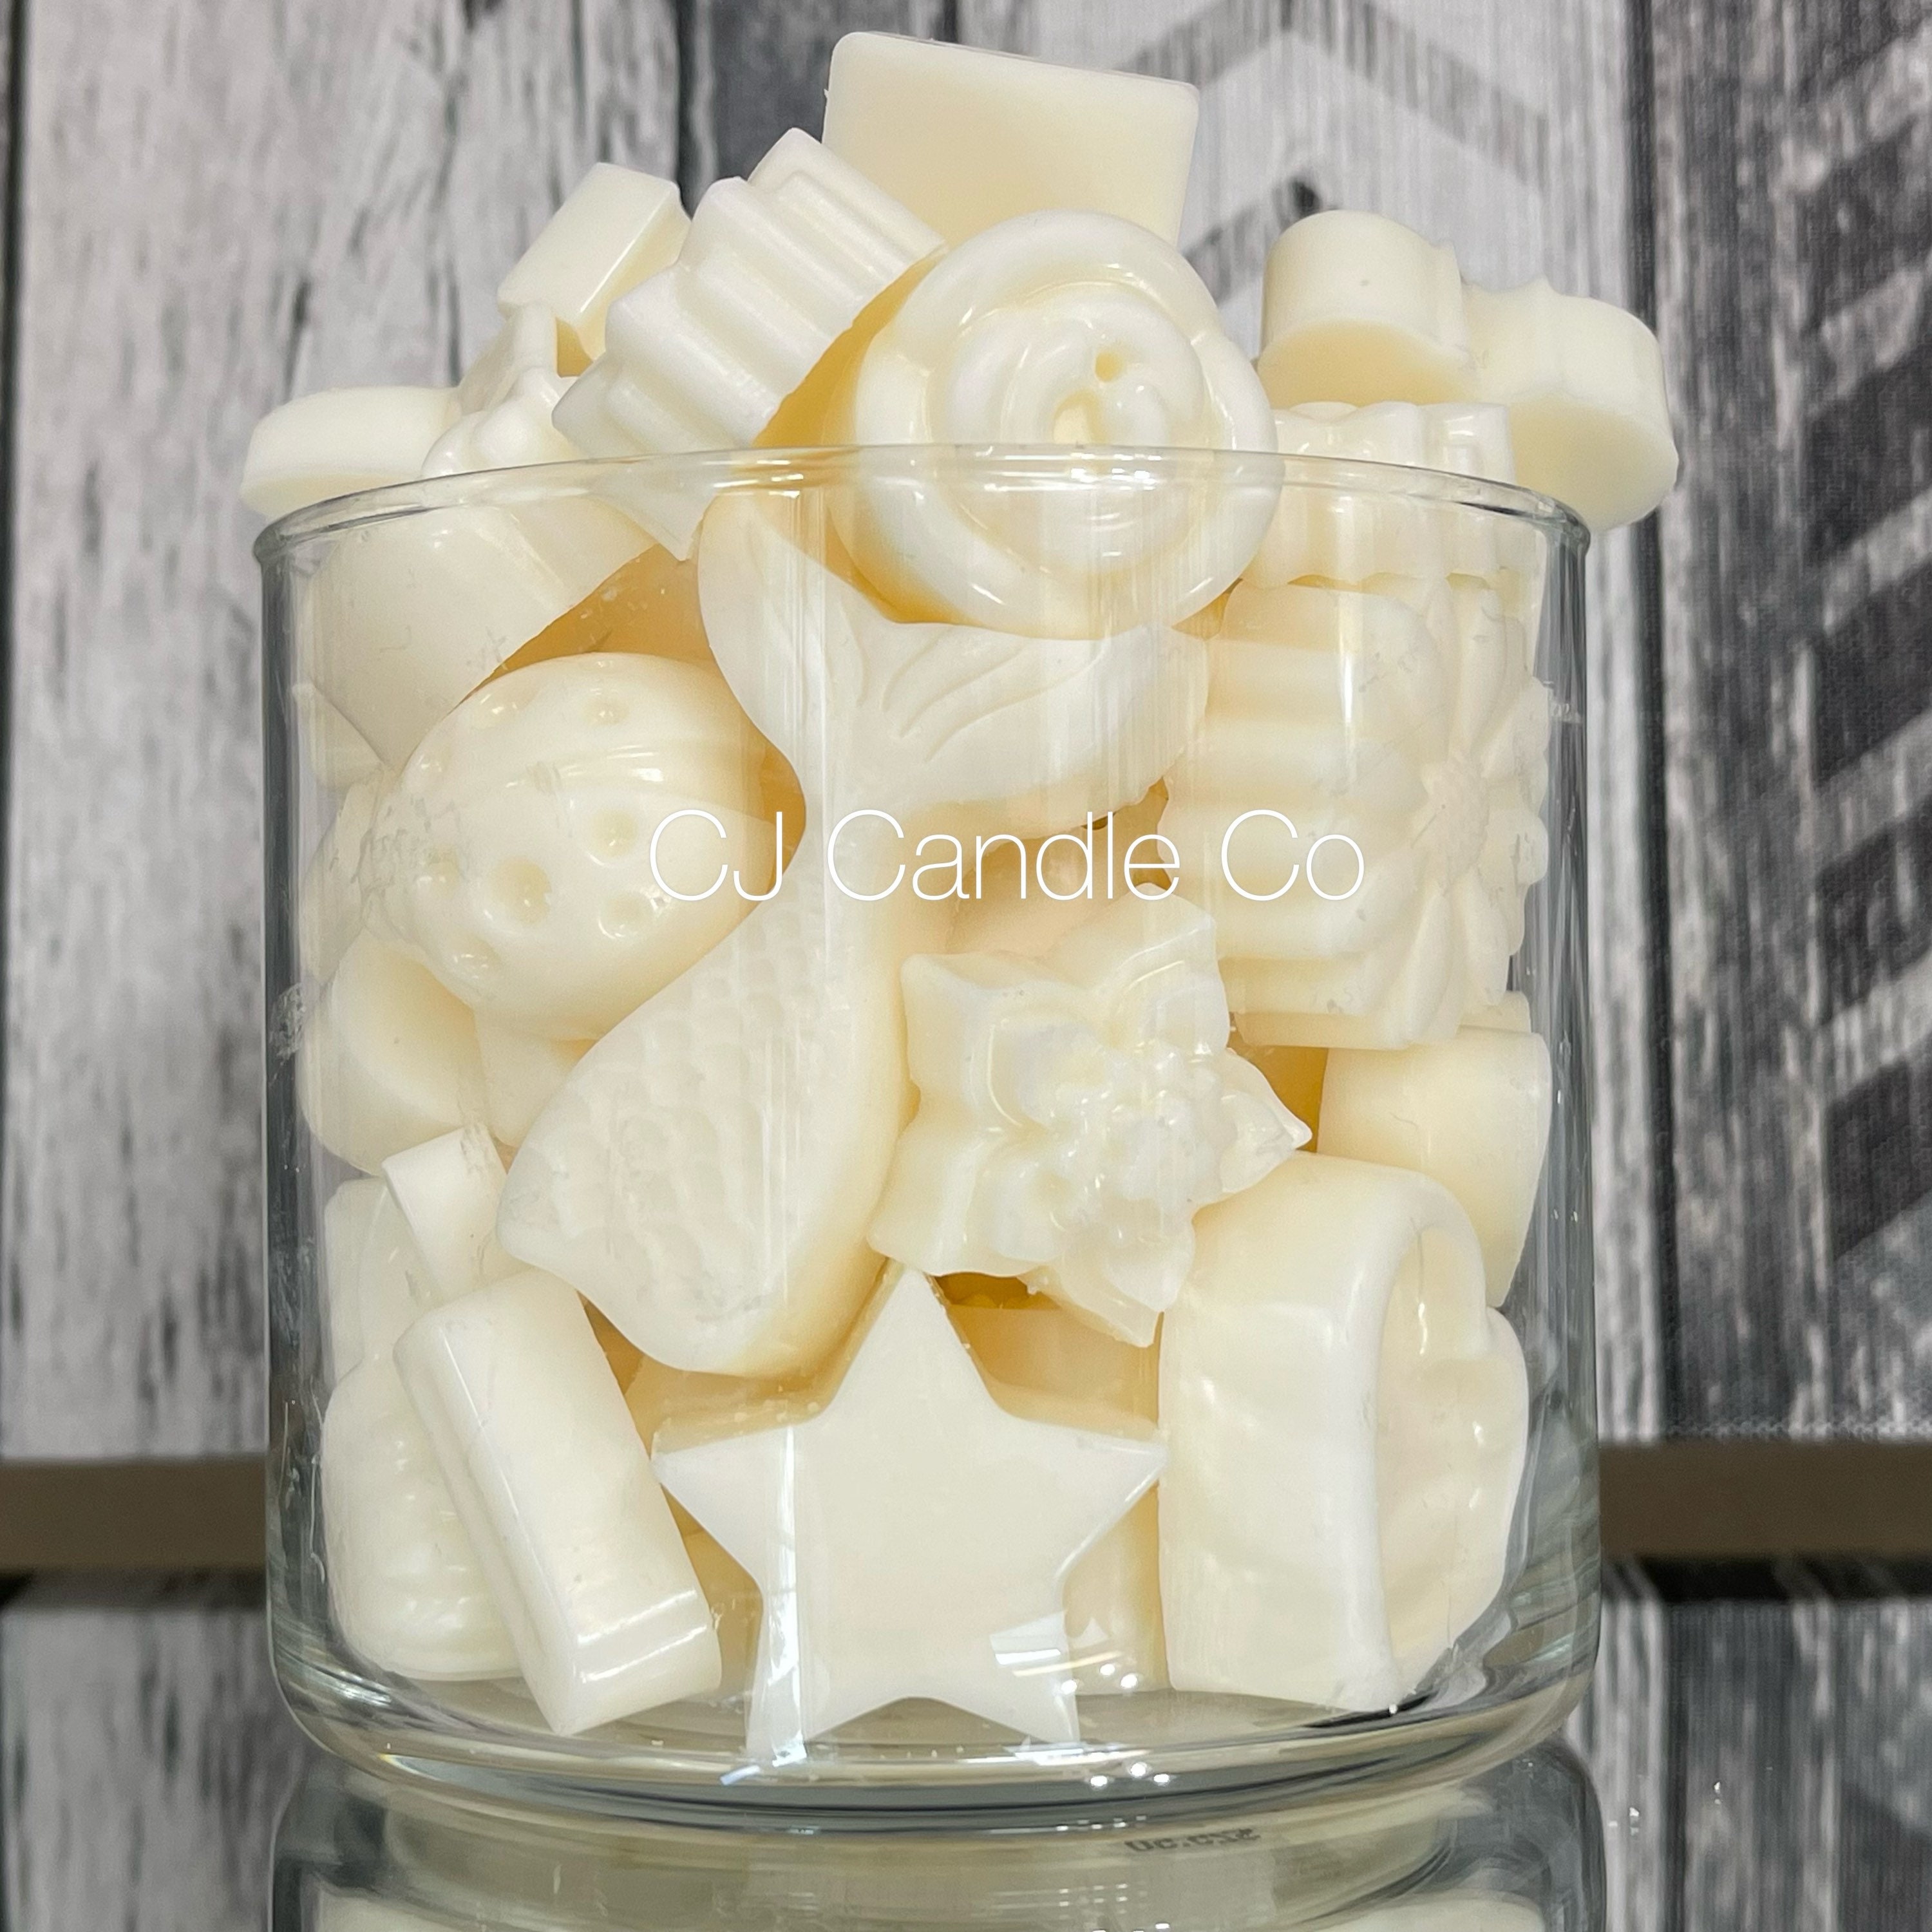 Peppermint and Eucalyptus Candles and Wax Melts – SurlyMommaCat Candles